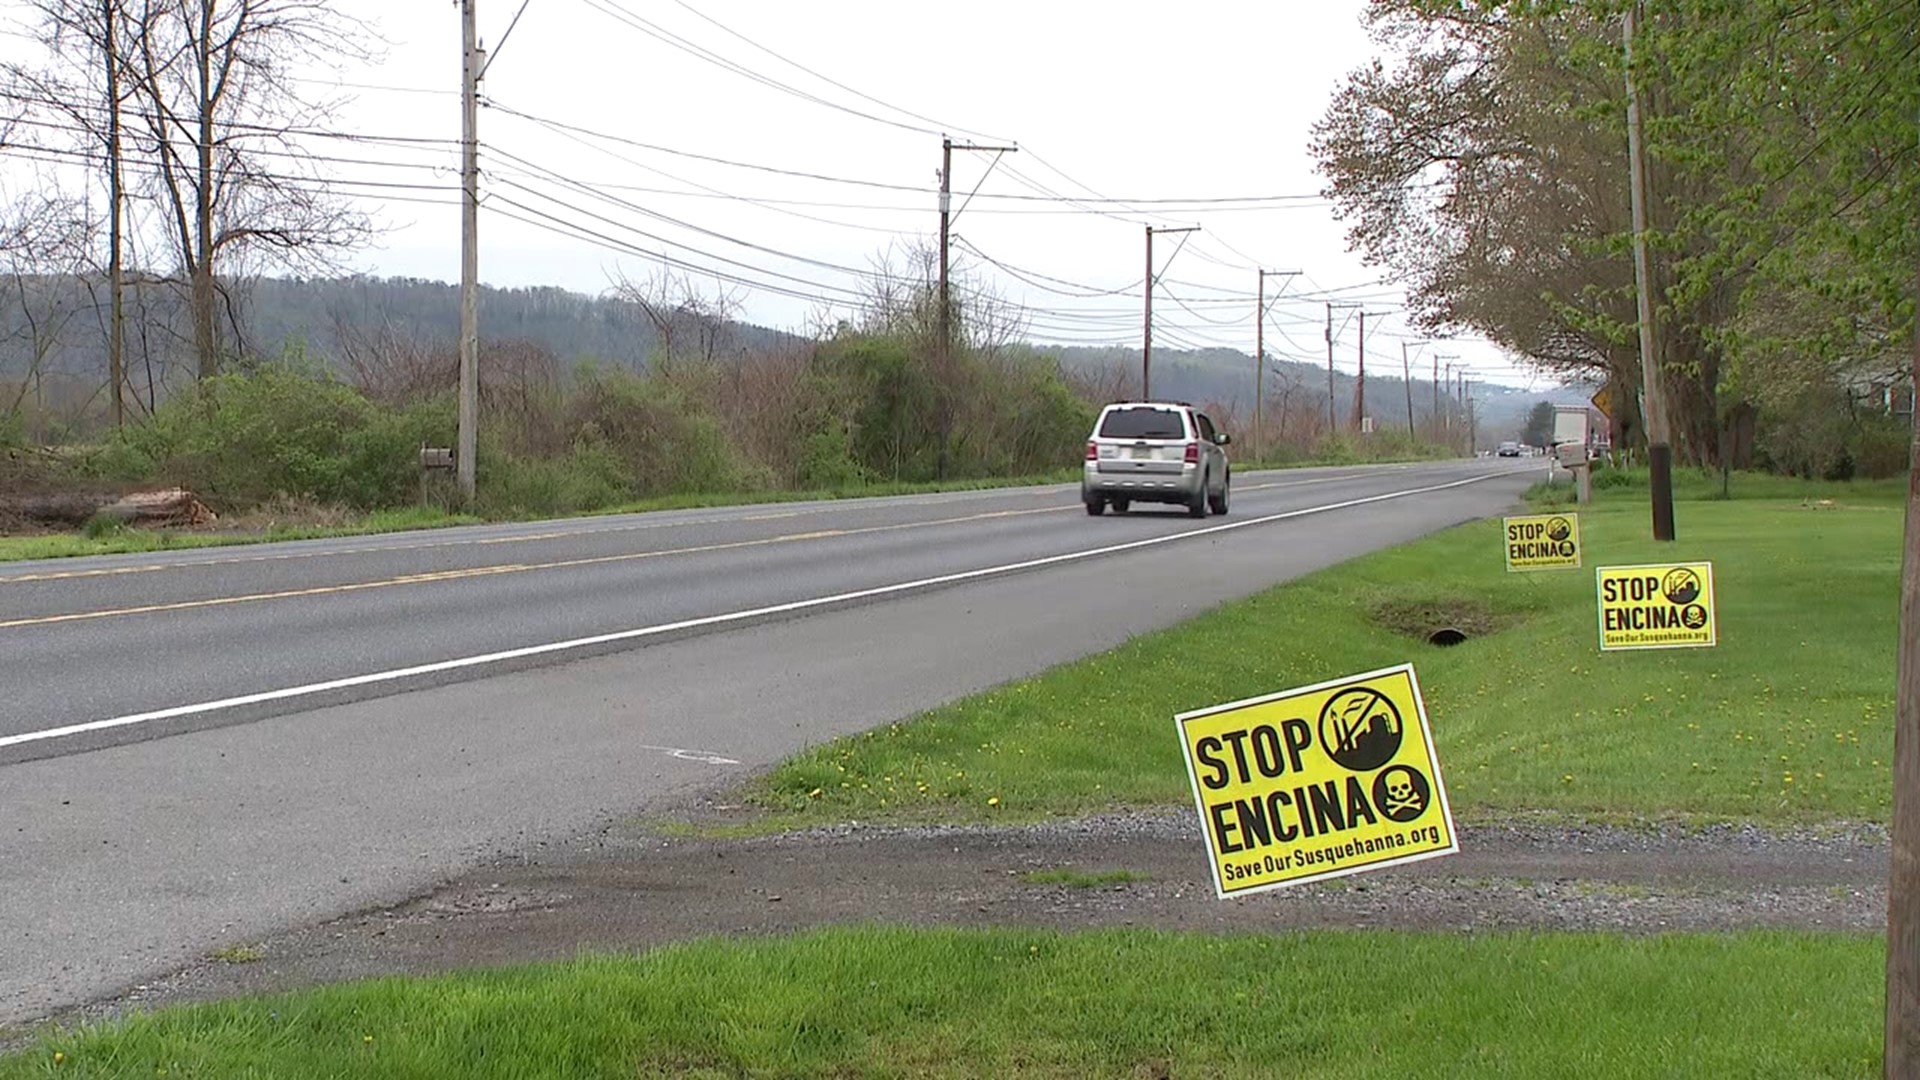 A billion-dollar company is pulling the plug on its plans to build in Central Pennsylvania.